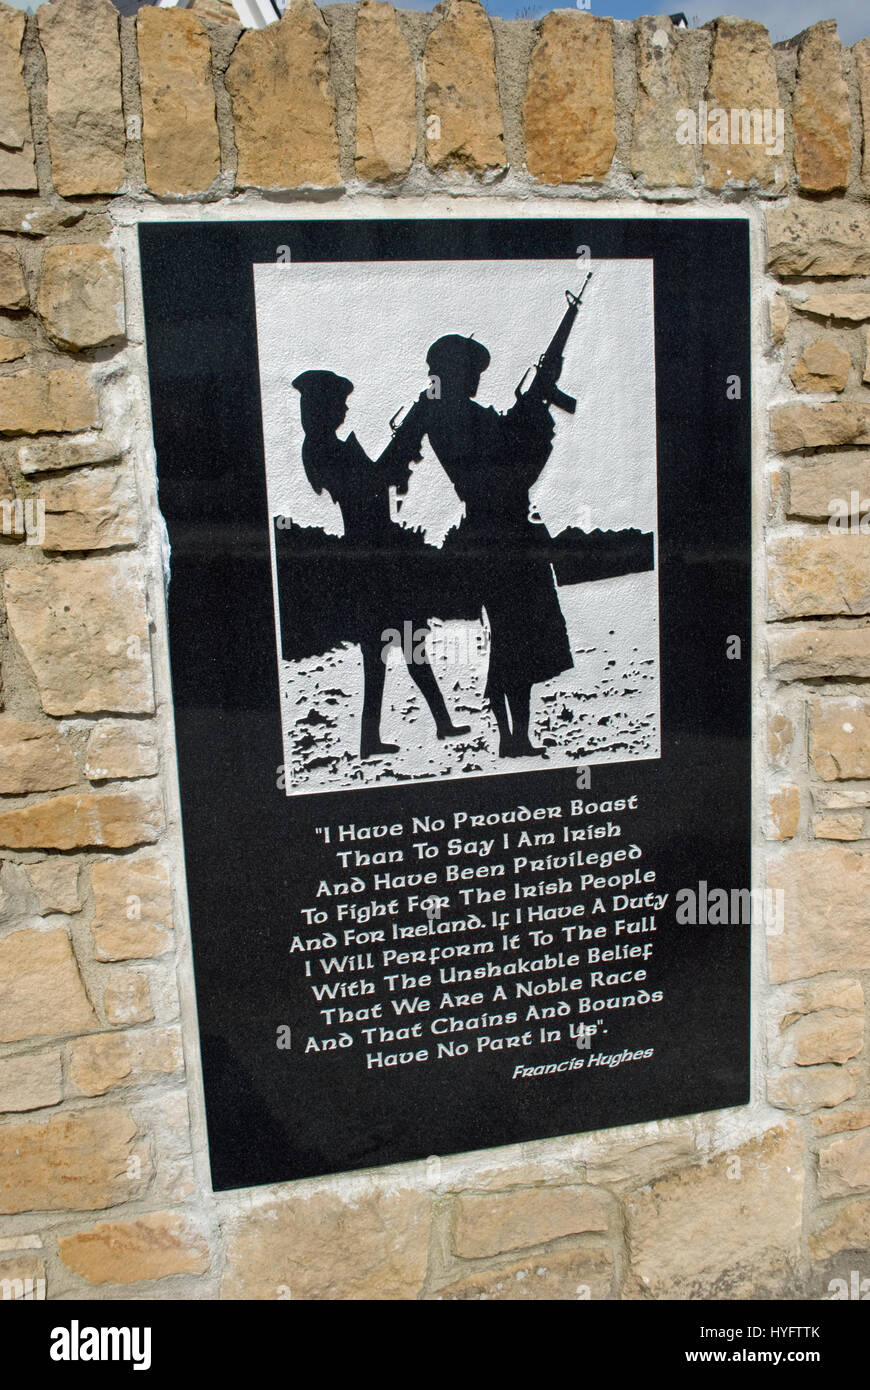 Memorial plaque at 'Drumboe Martyrs' monument dedicated to IRA vounteers who fought and died for Irish freedom. Stock Photo